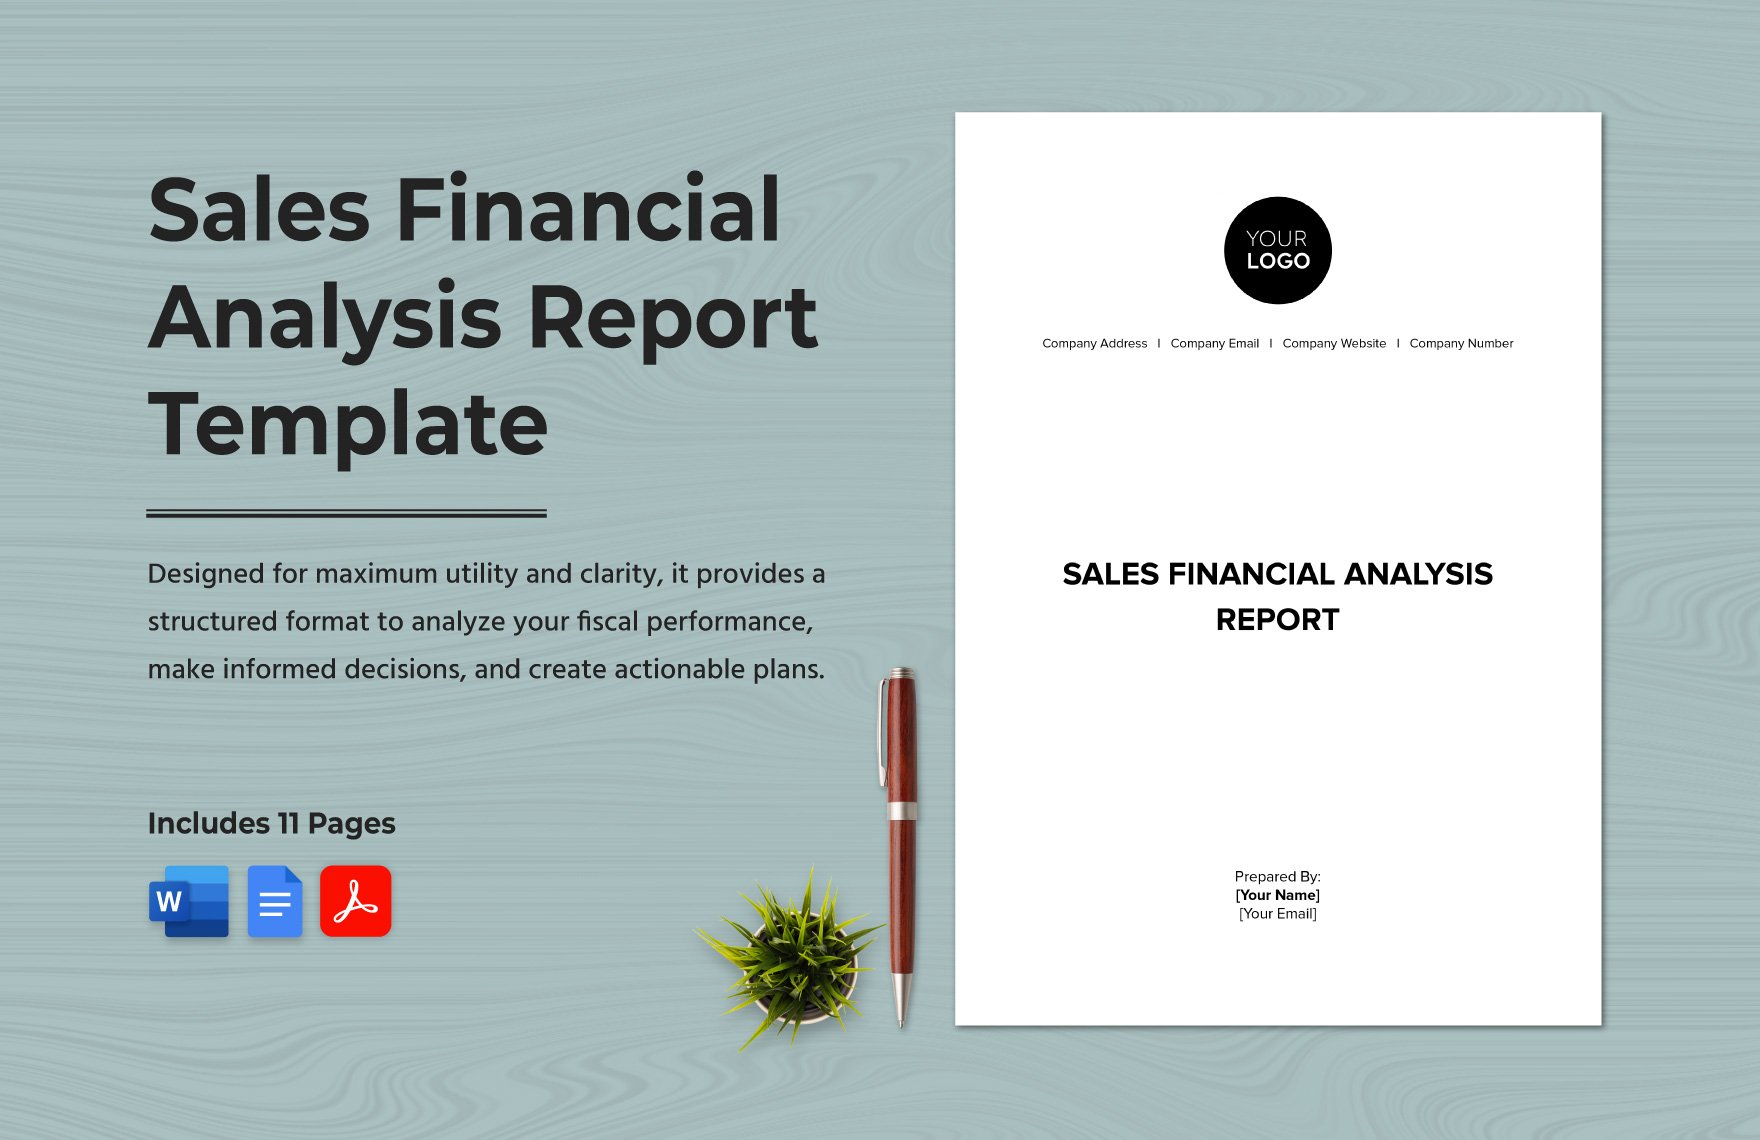 Sales Financial Analysis Report Template